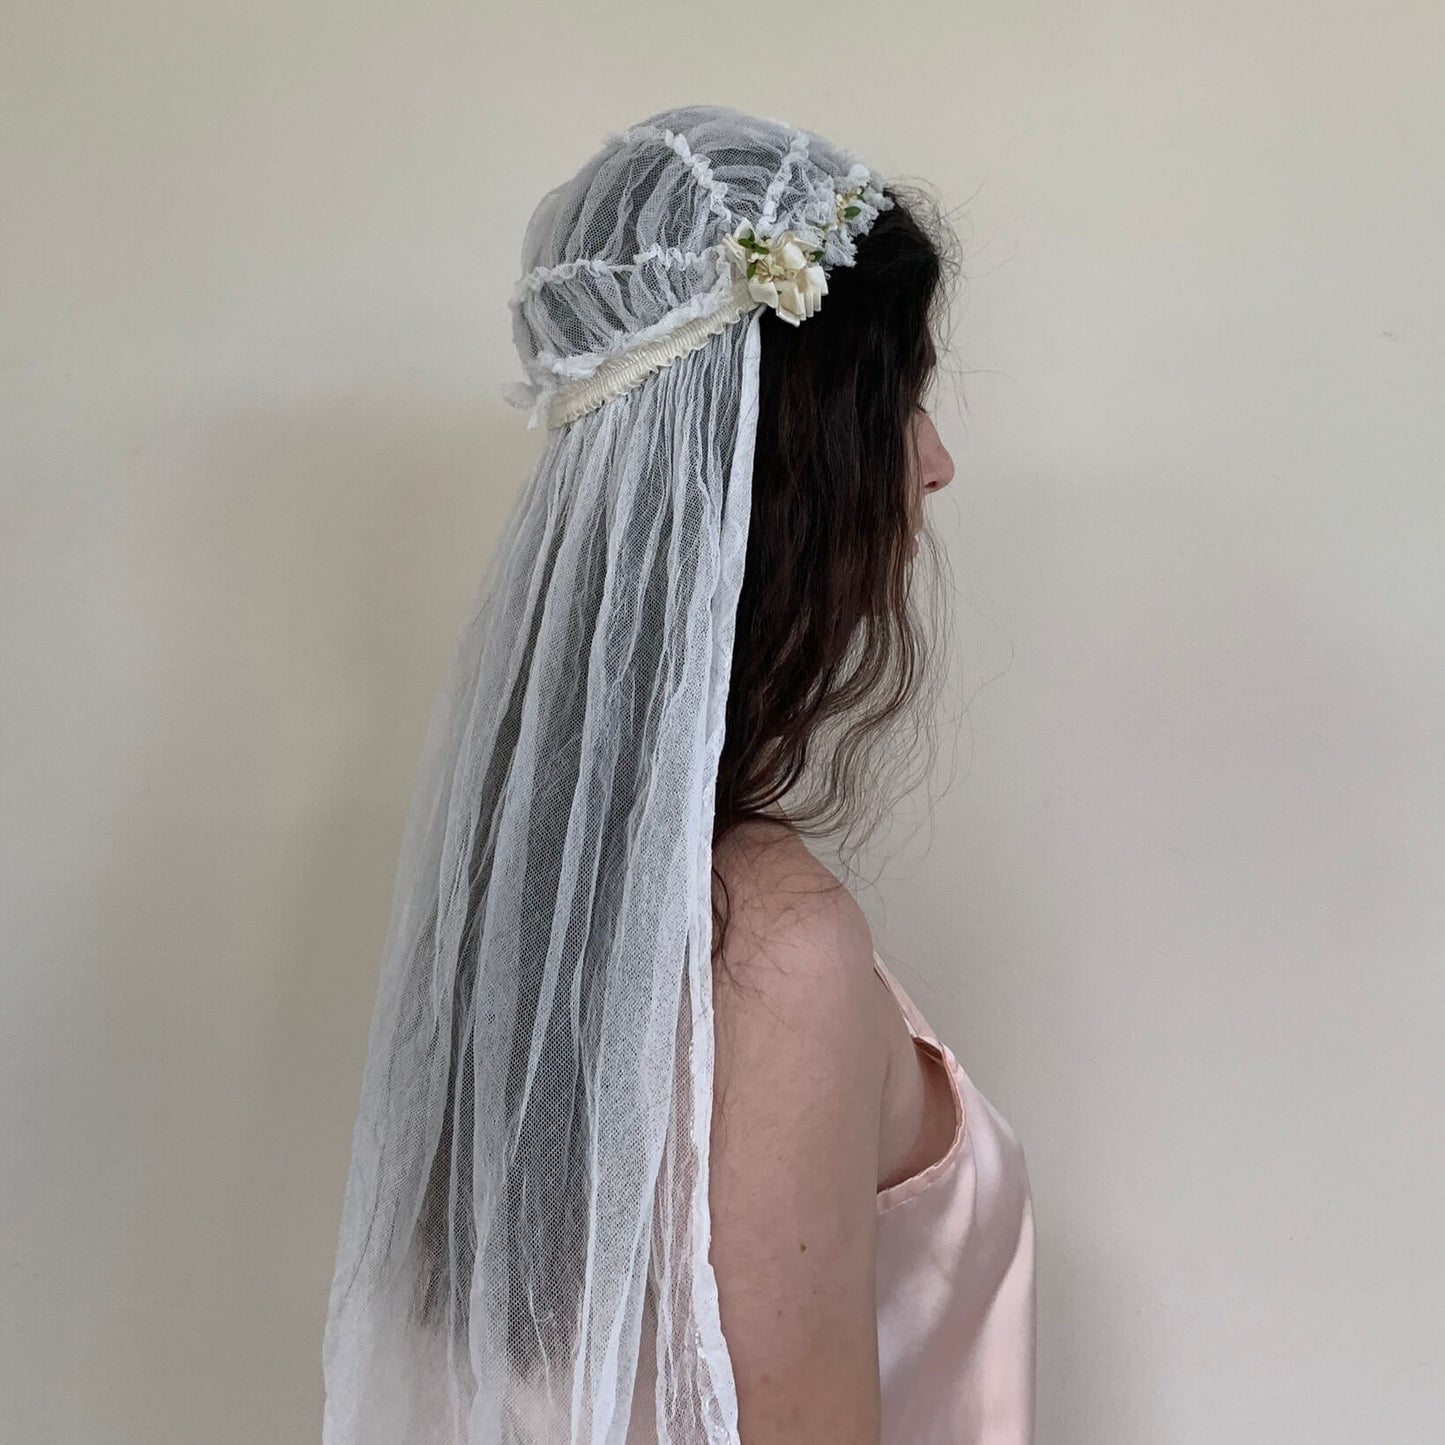 1920s wedding veil viewed from the side